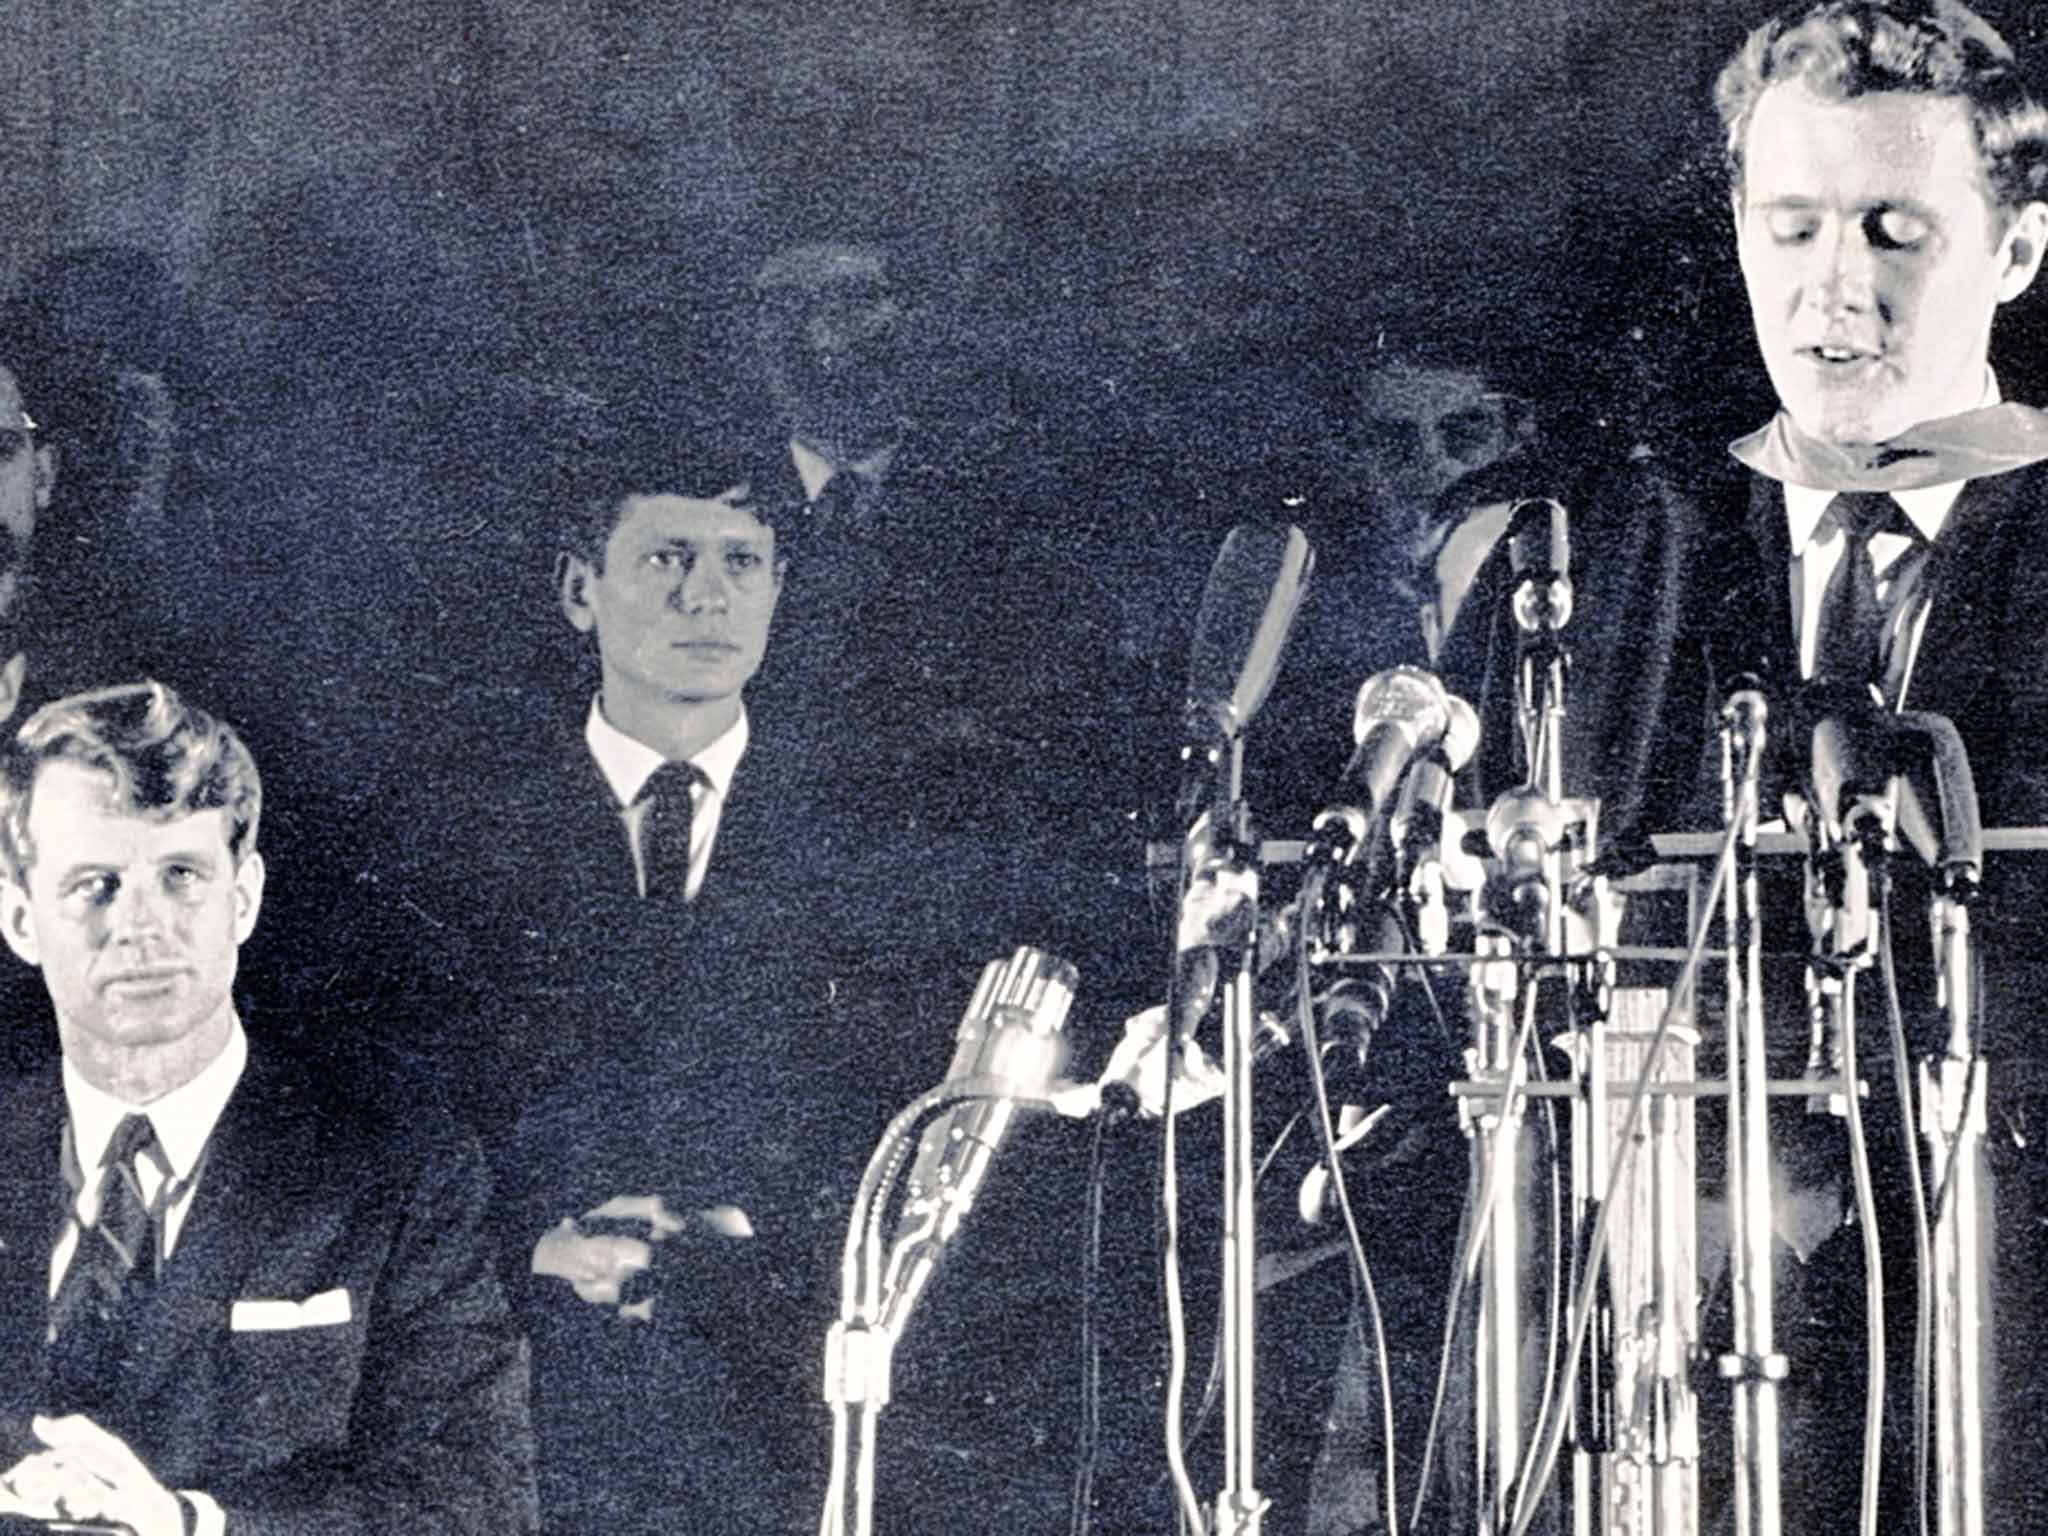 Daniel introduces Robert Kennedy before the American's speech to the National Union of South African Students in Cape Town in 1966